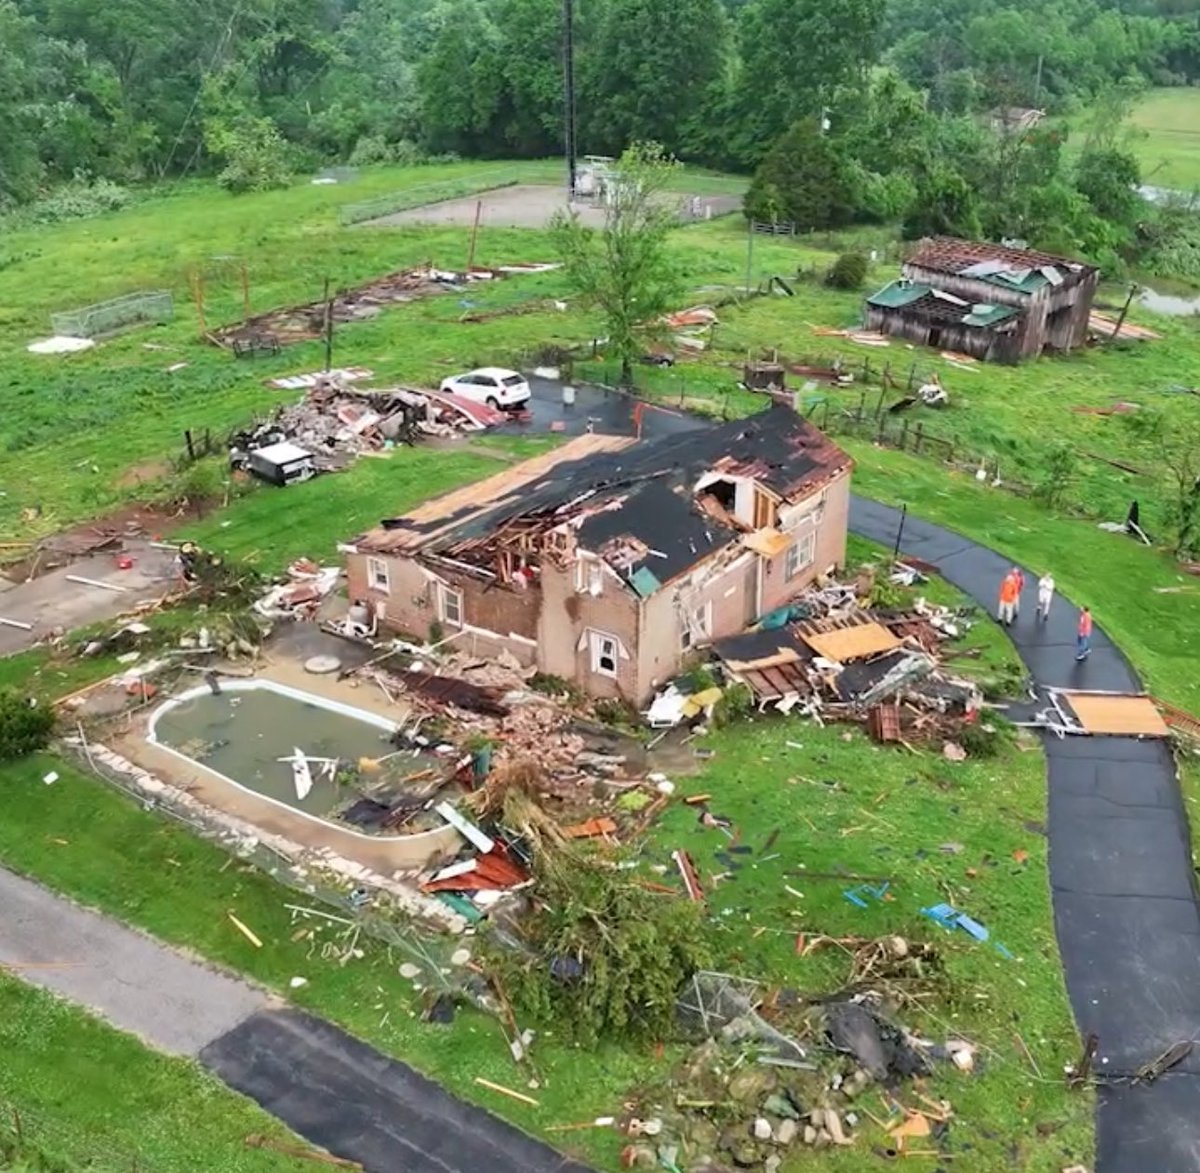 Homes damaged near #columbia Tennessee from a tornado that crossed over I-65 south of Nashville. #tornado